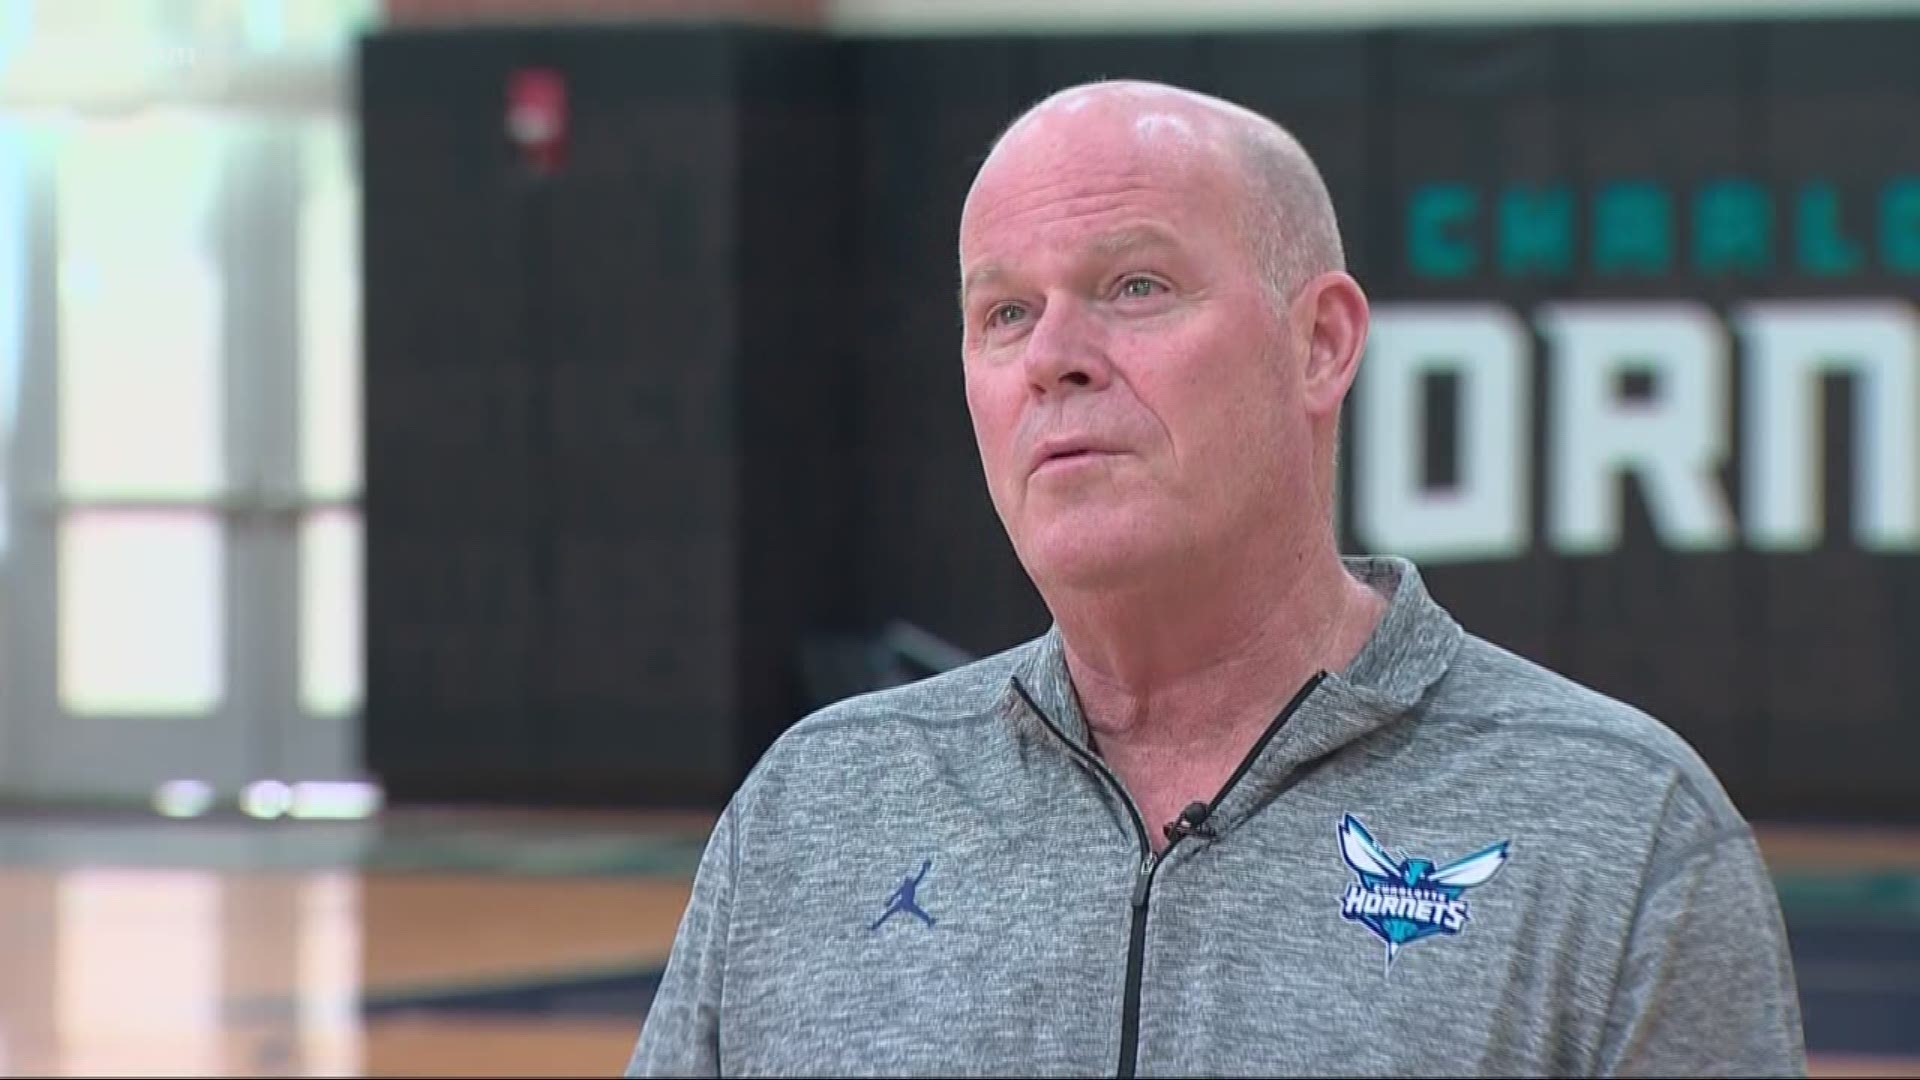 The Charlotte Hornets announced Friday that head coach Steve Clifford has been relieved of his duties.